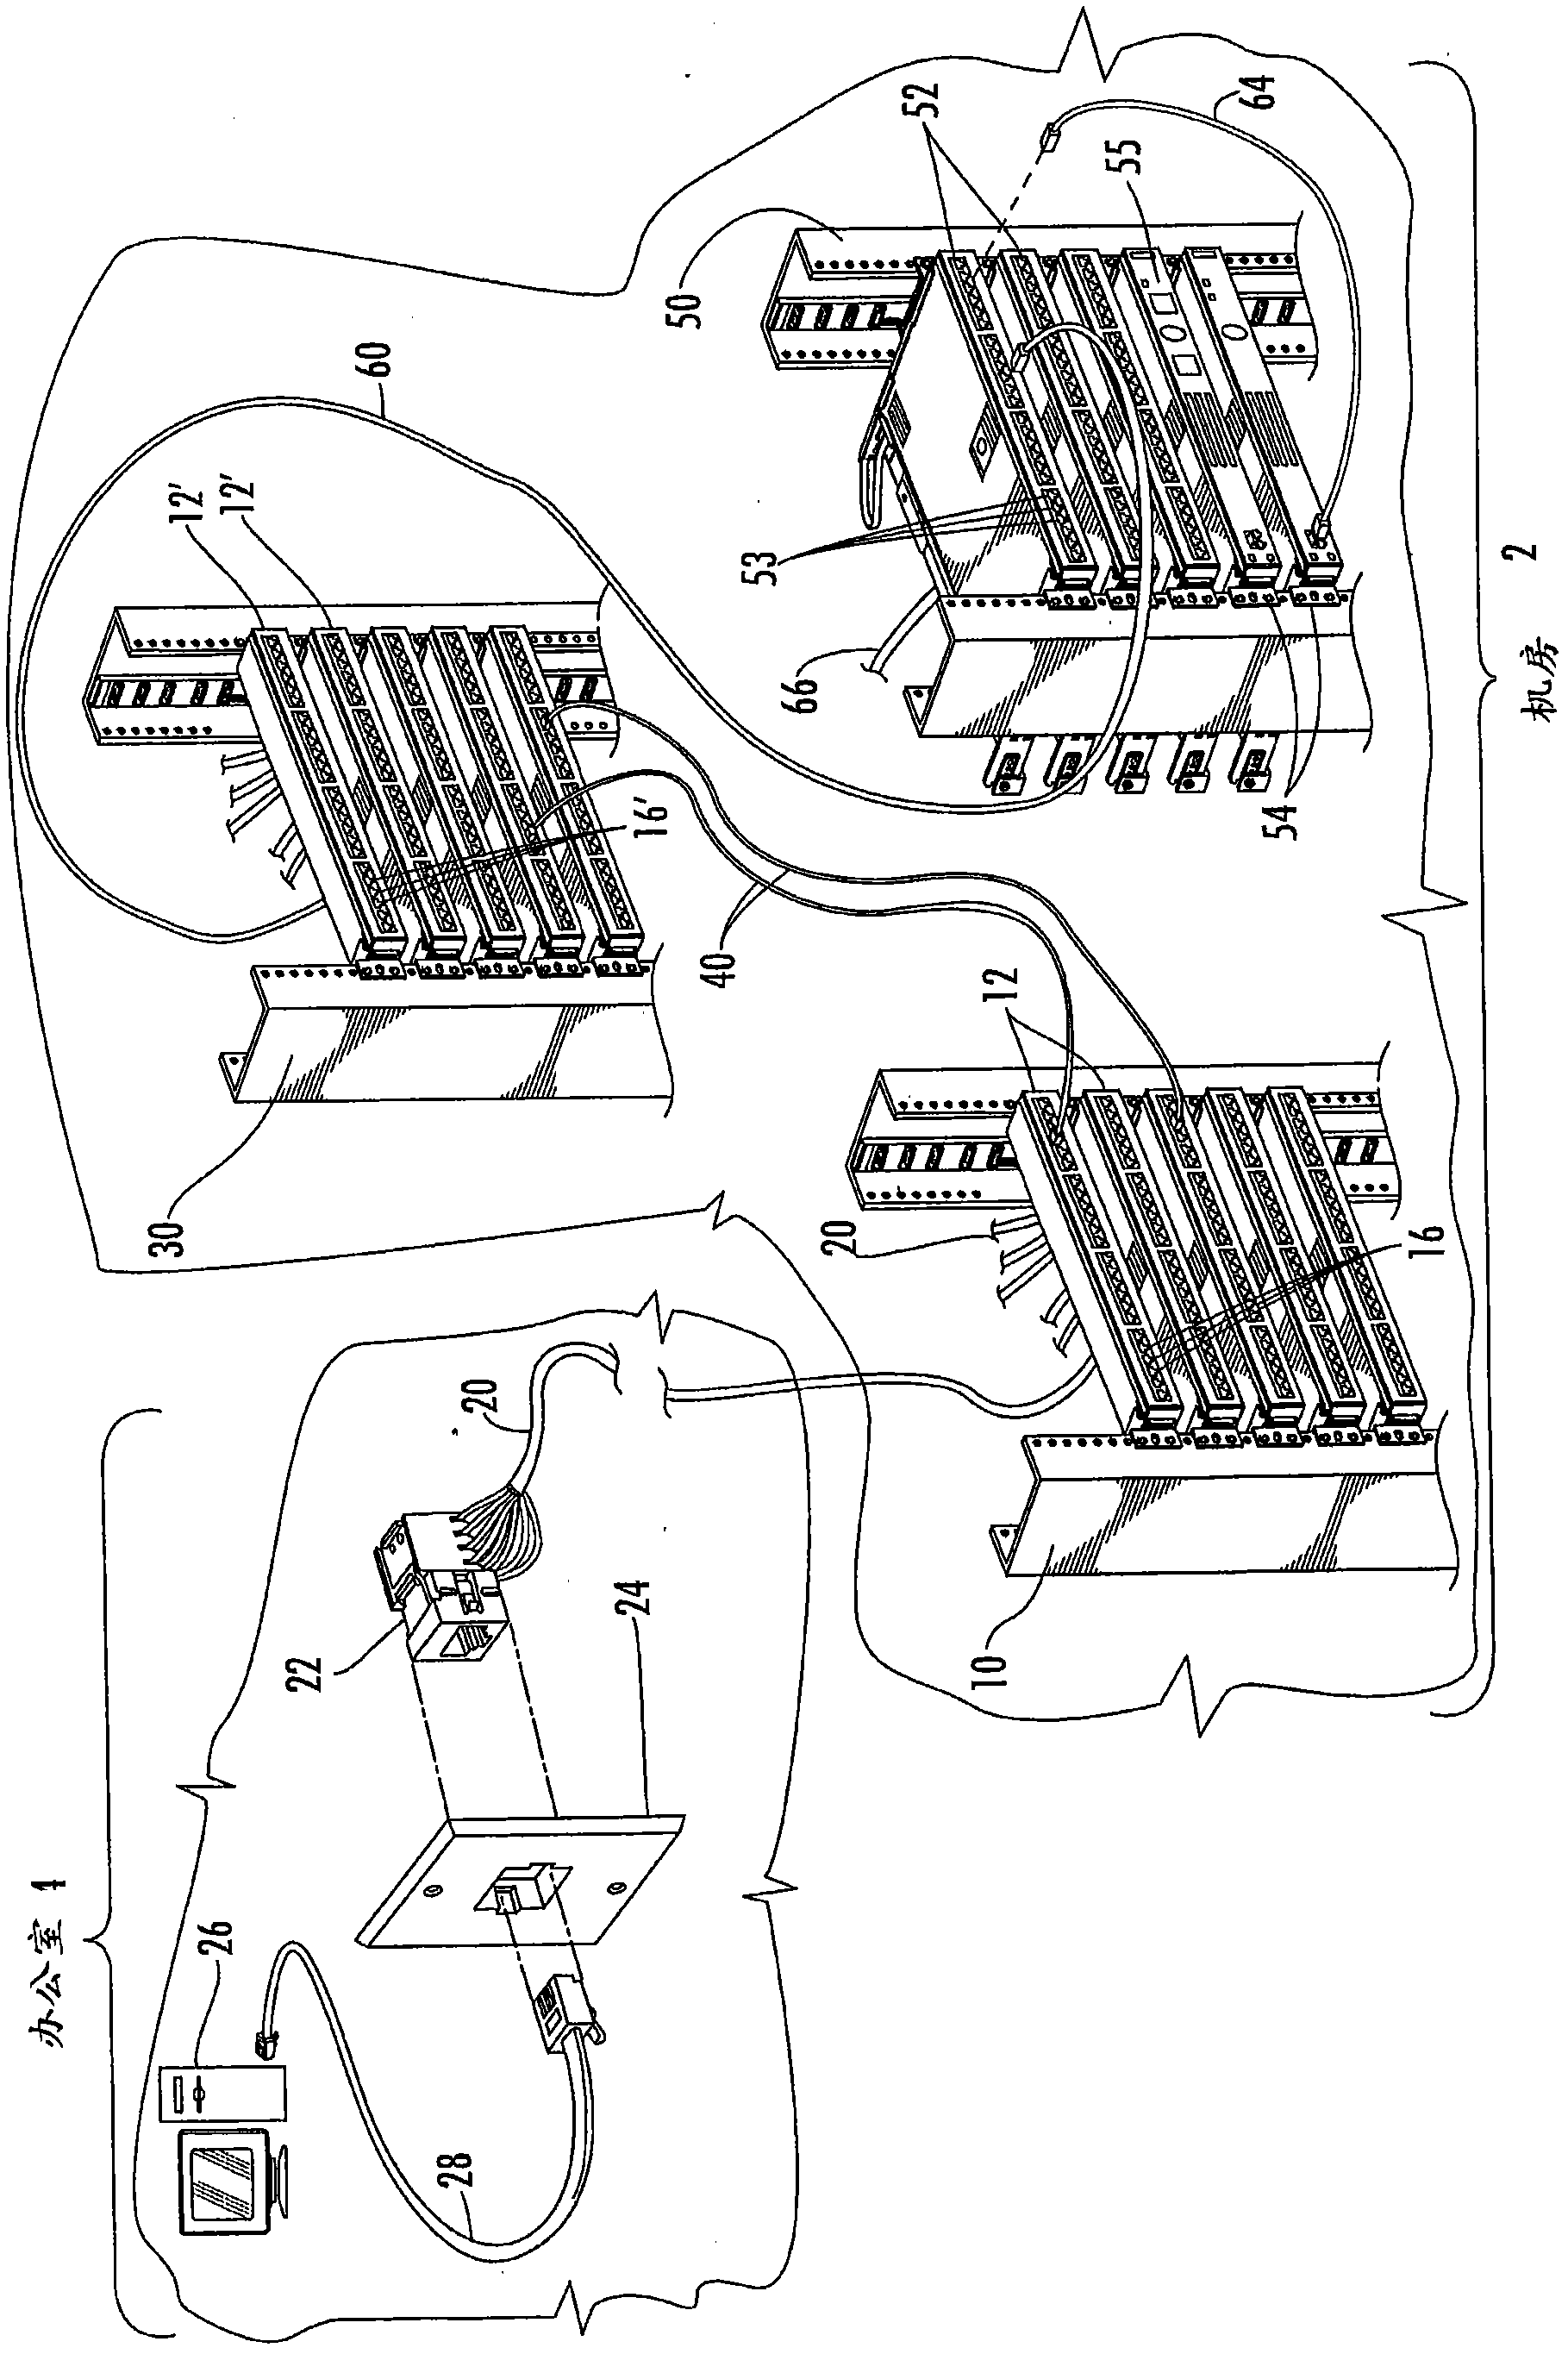 Systems for automatically tracking patching connections to network devices using a separate control channel and related patching equipment and methods